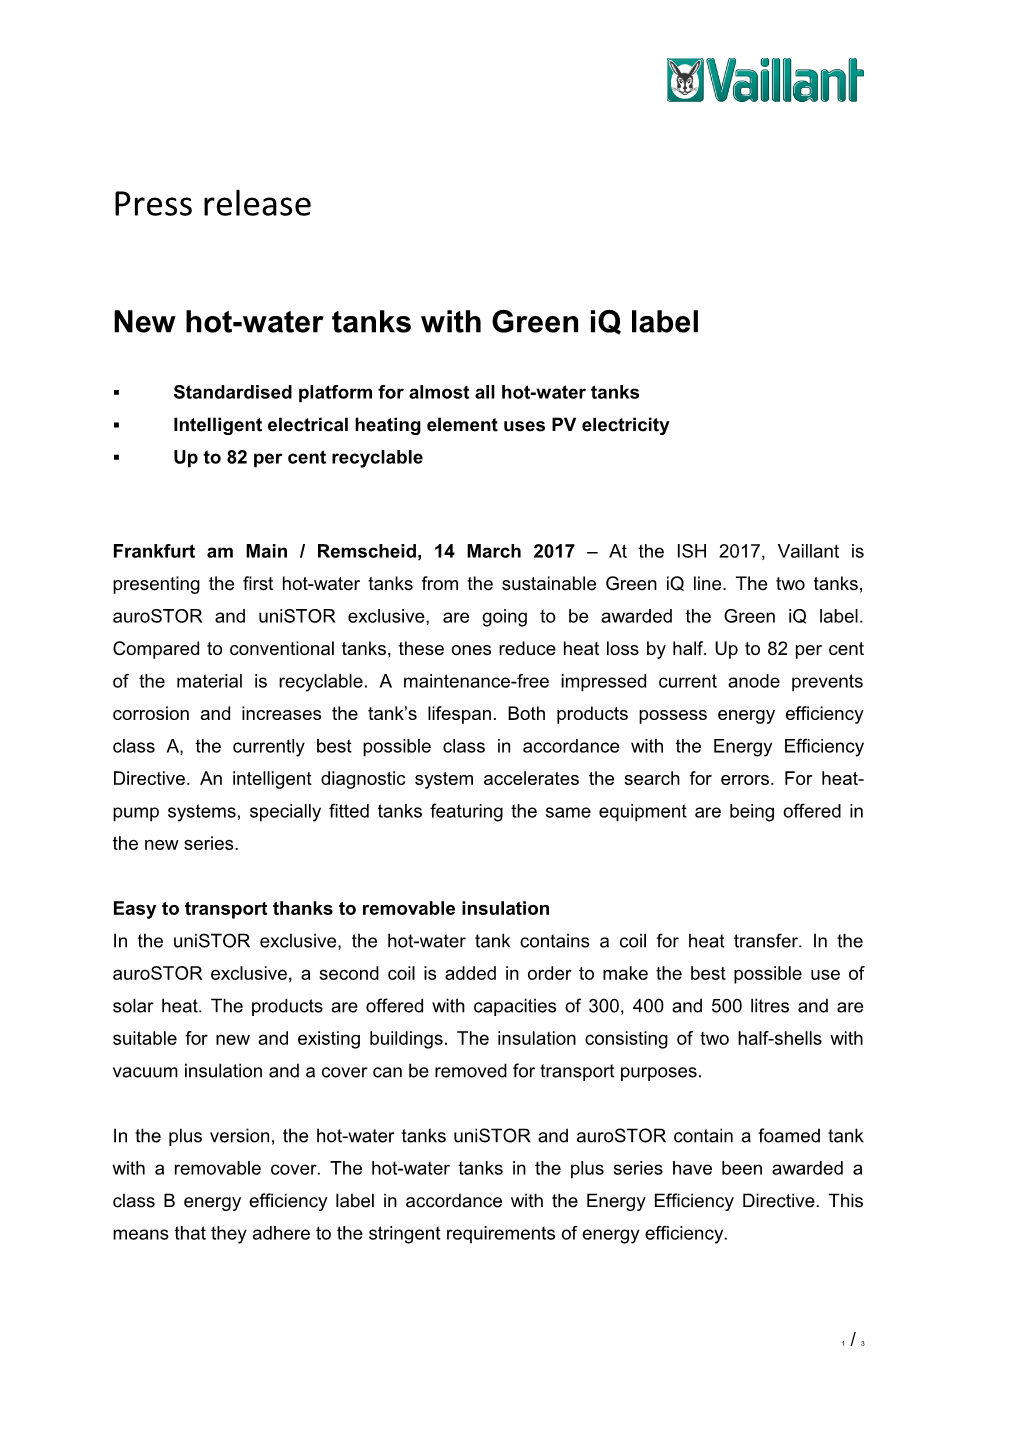 New Hot-Water Tanks with Green Iq Label